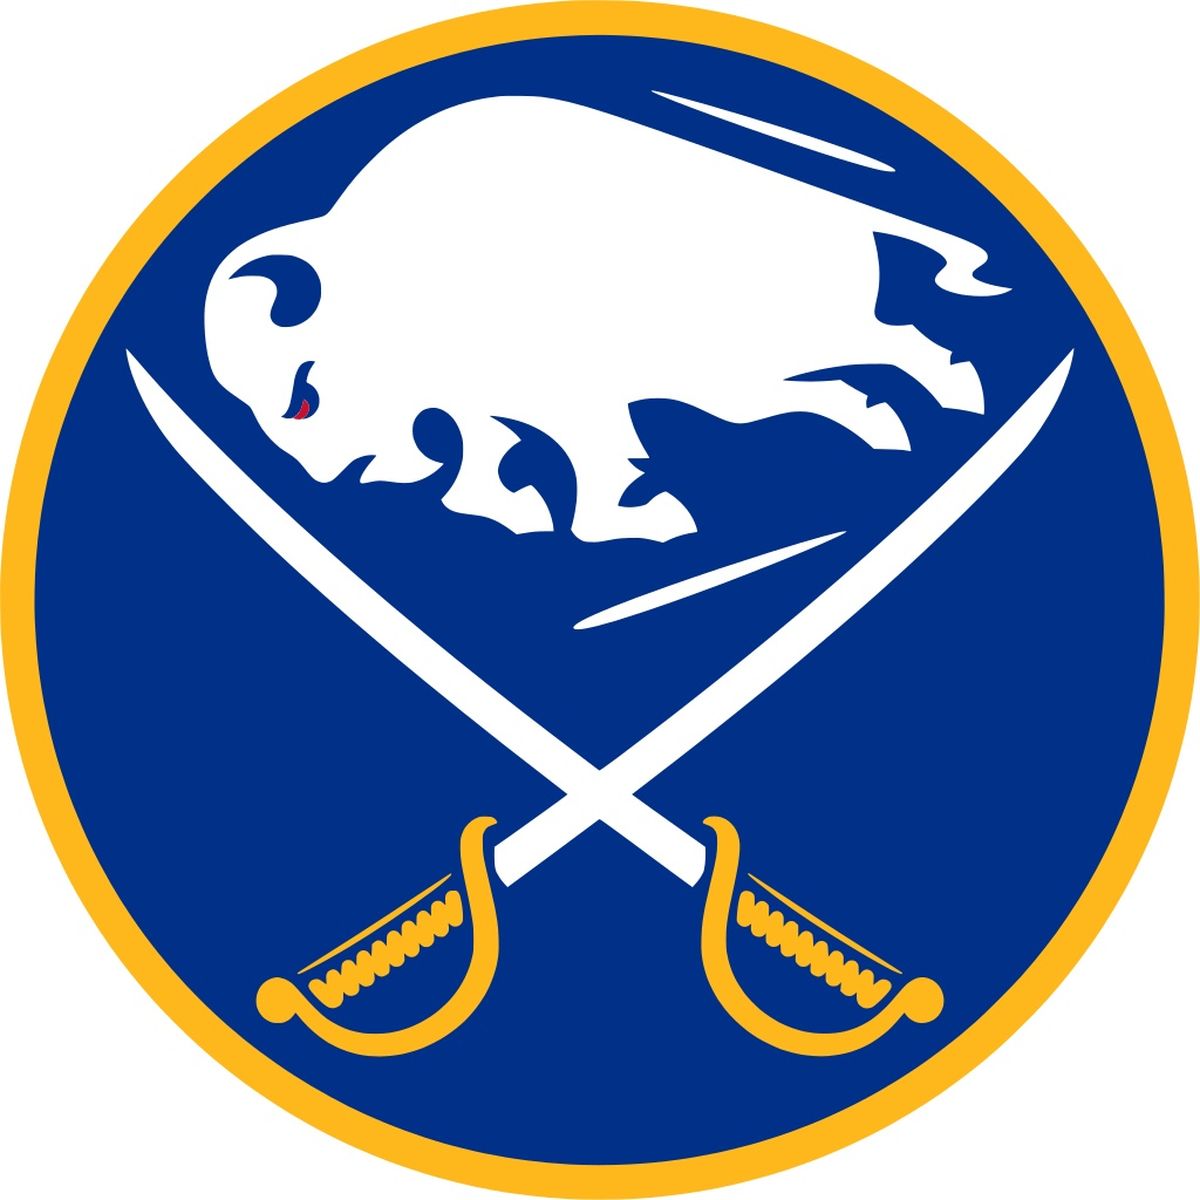 The logo for the Buffalo Sabres NHL team